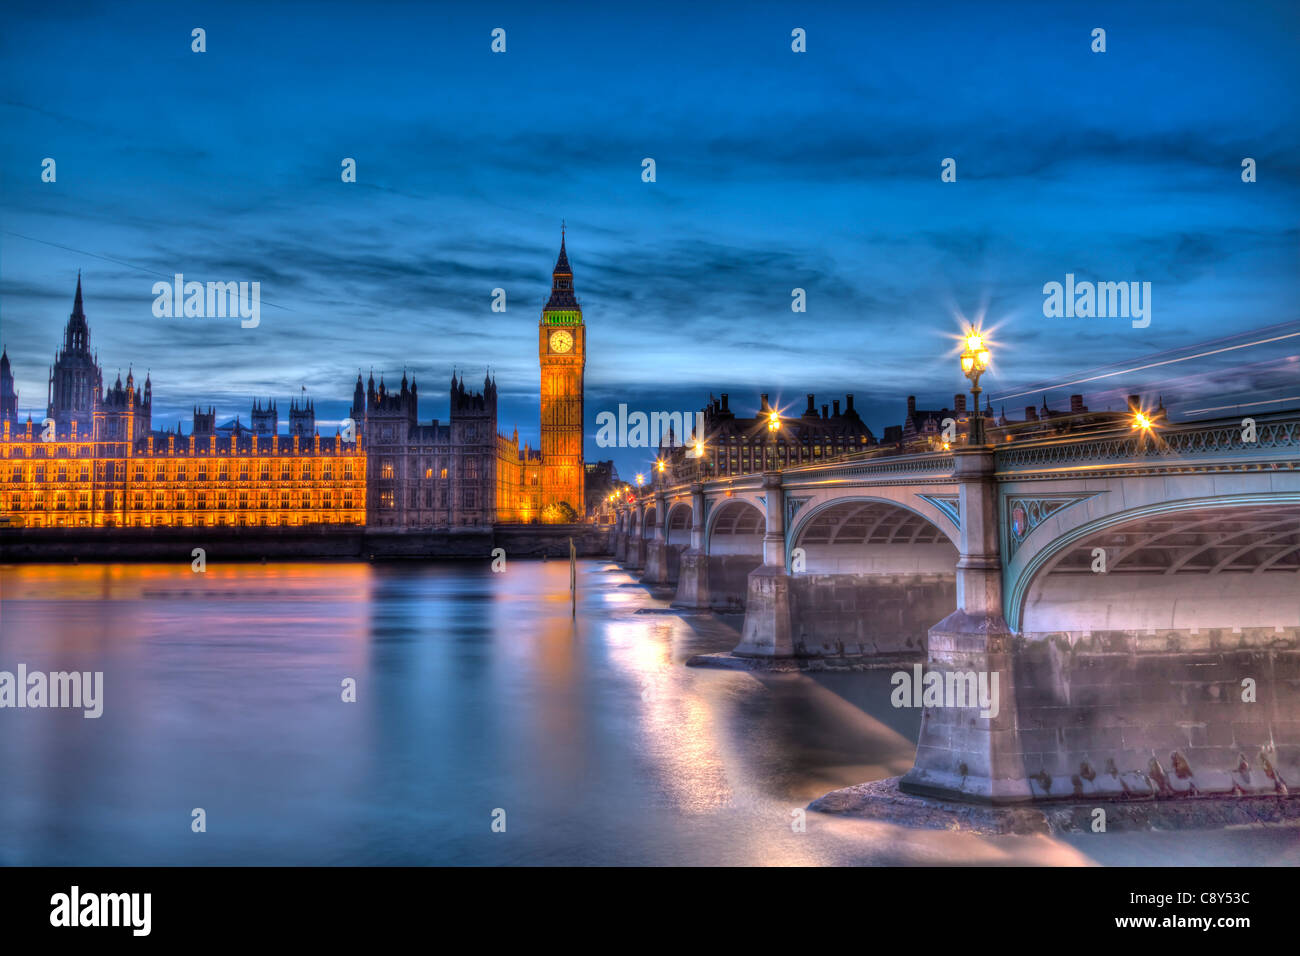 The Houses of Parliament (Palace of Westminster) London, England Stock Photo